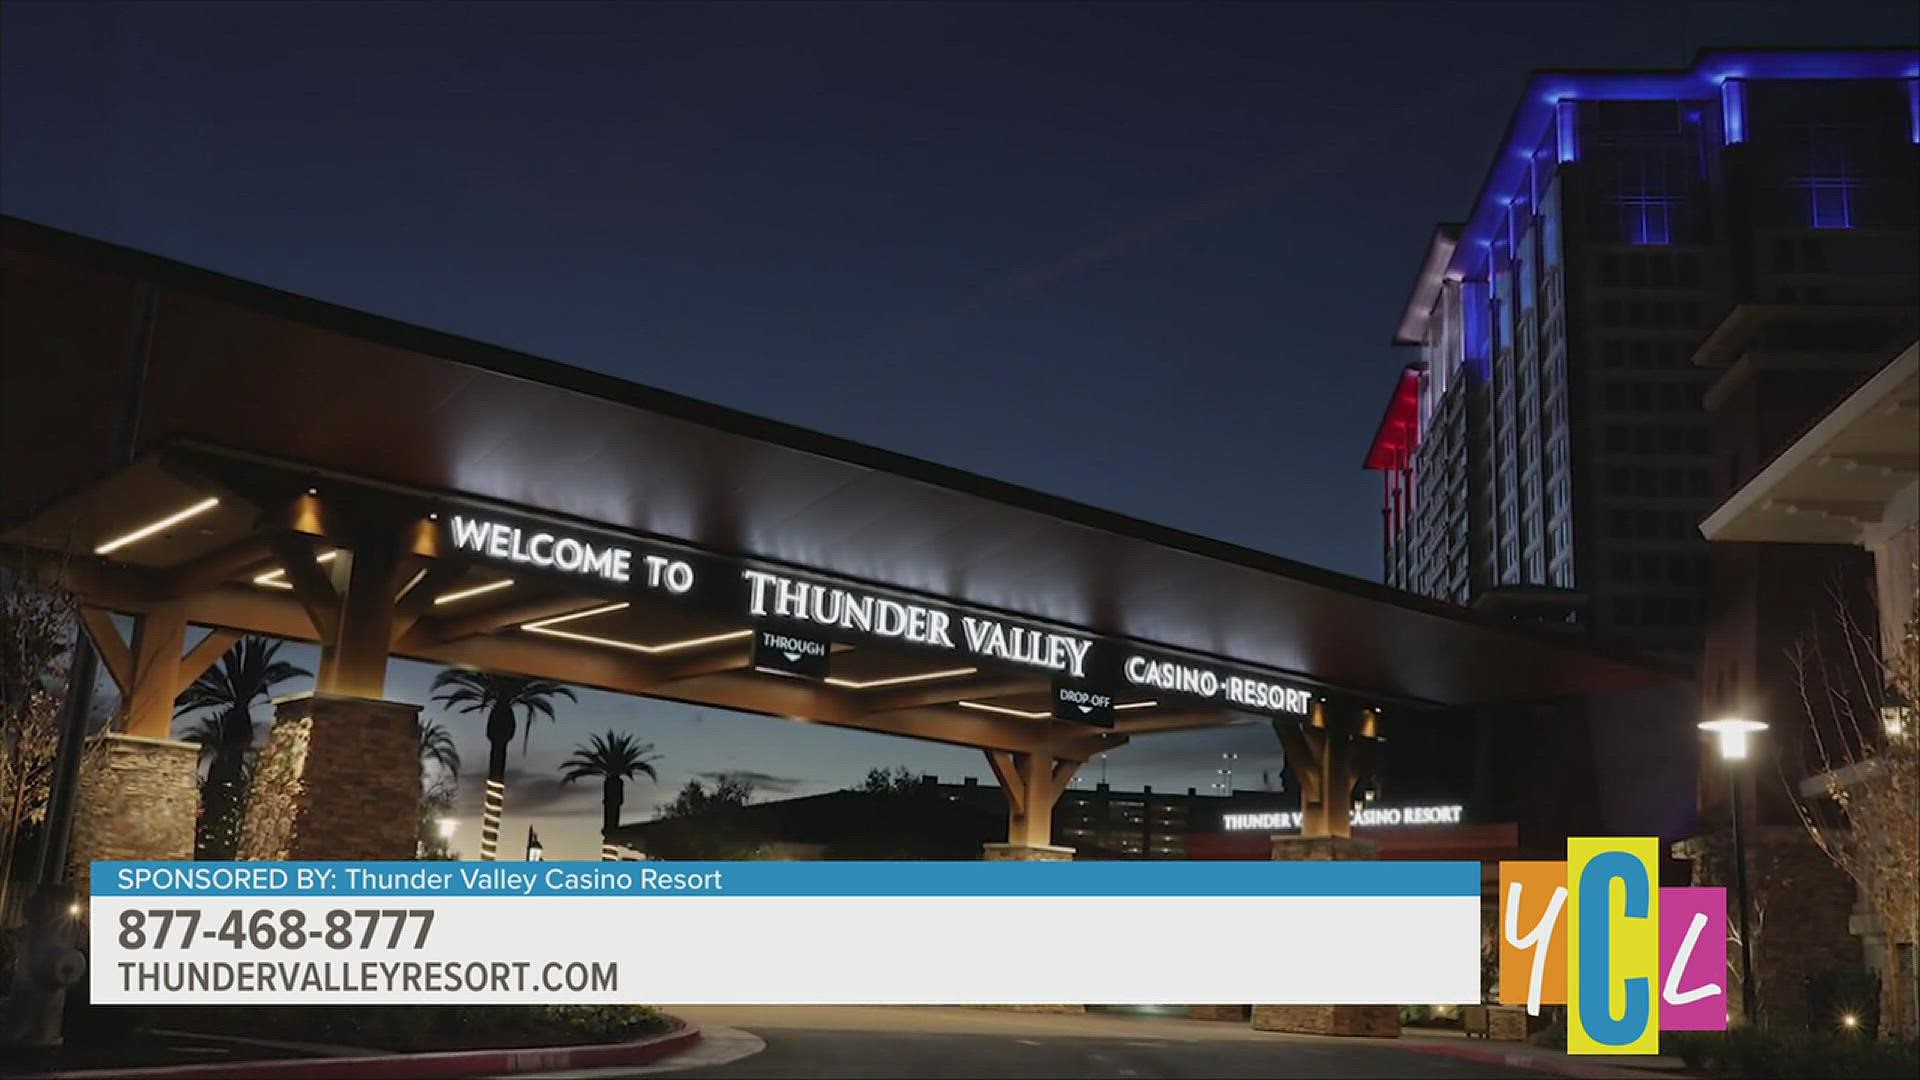 Get ready for a spectacular new entertainment locale: The Venue at Thunder Valley! This segment is paid by Thunder Valley Casino Resort.